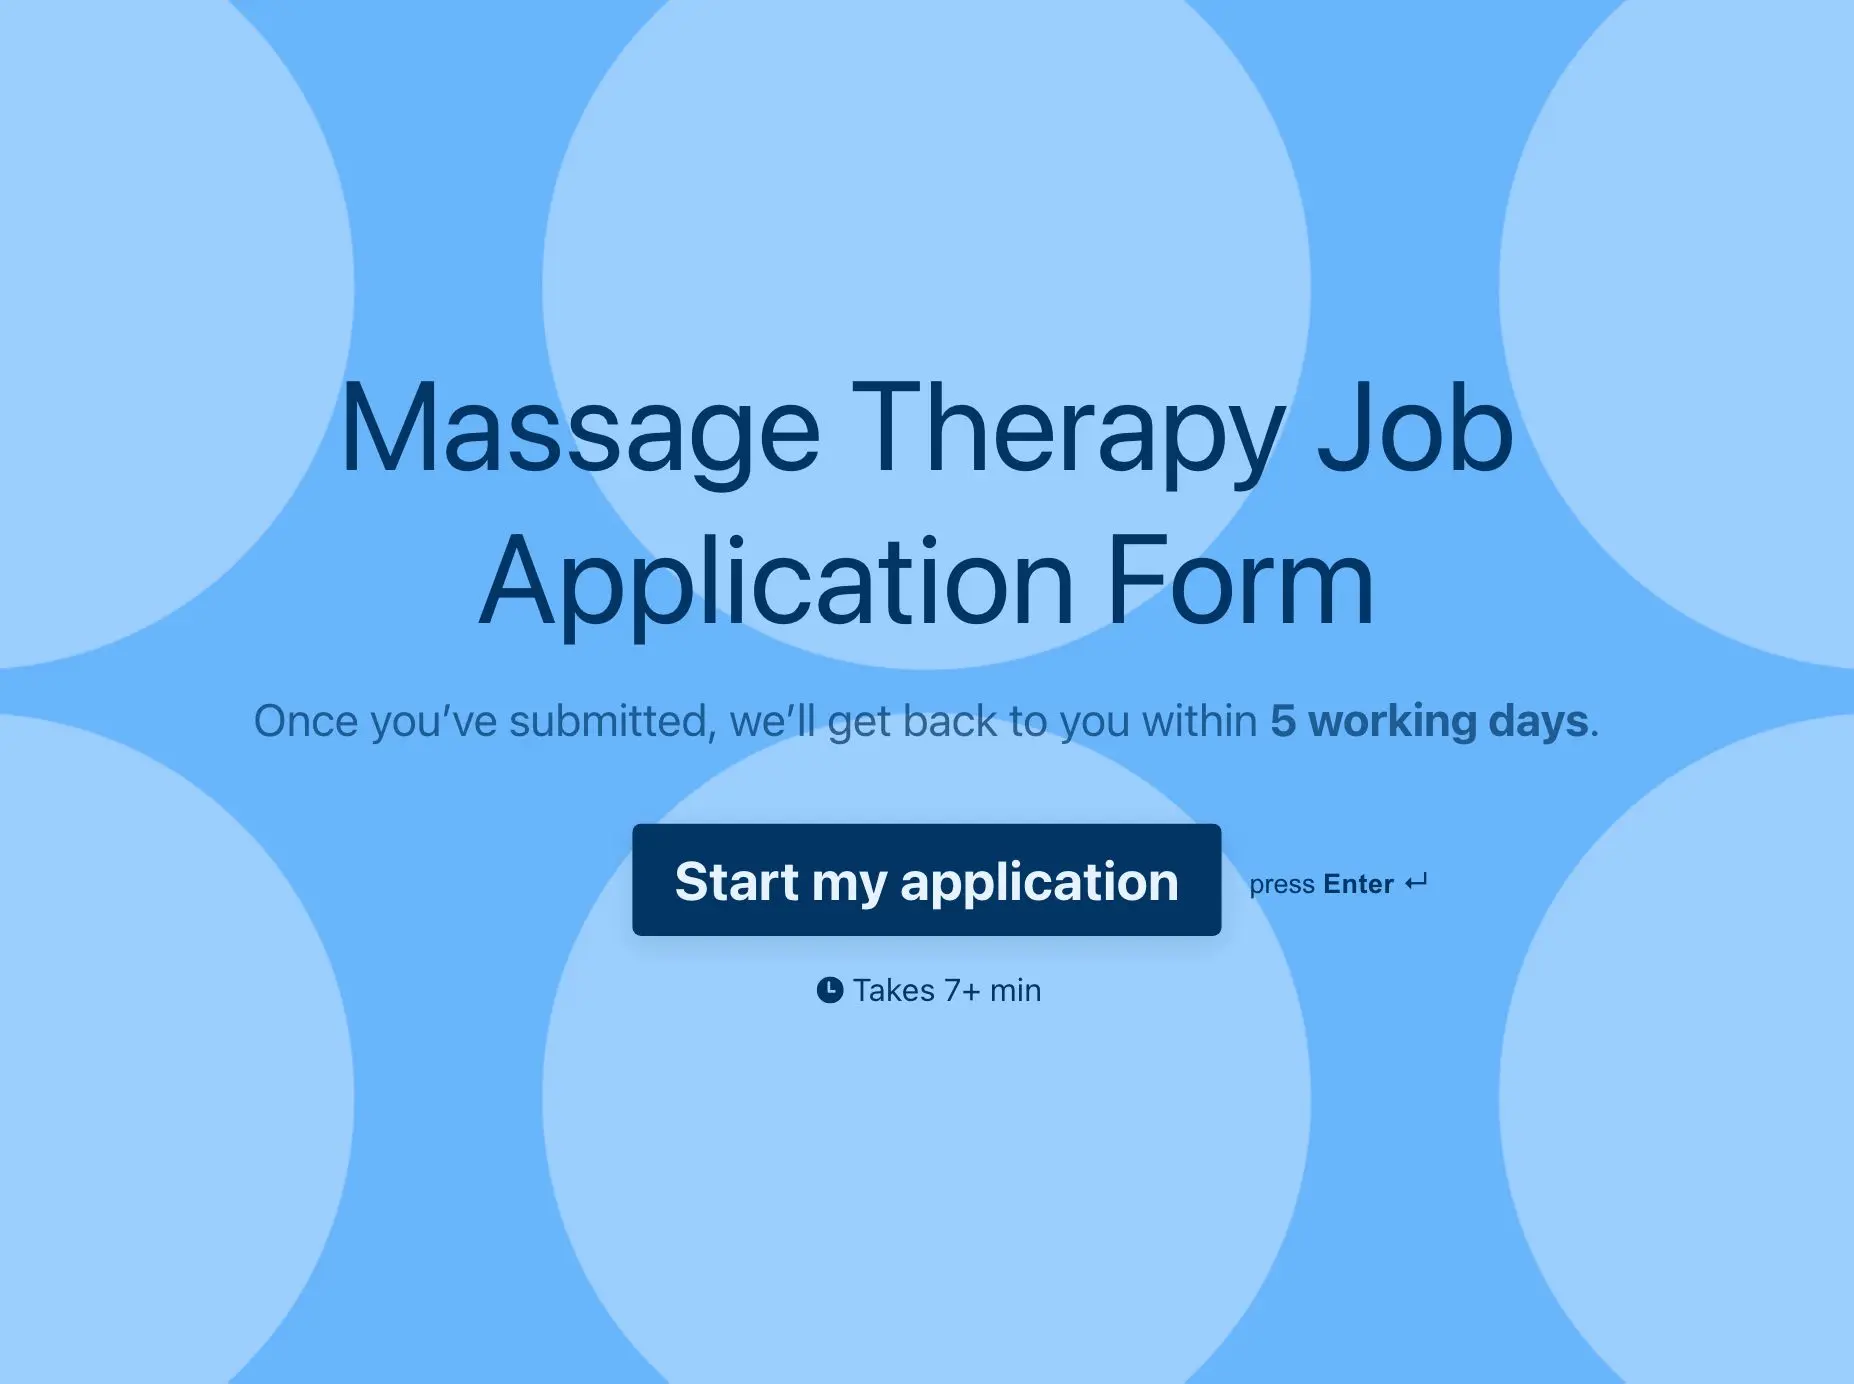 Massage Therapy Job Application Form Template Hero